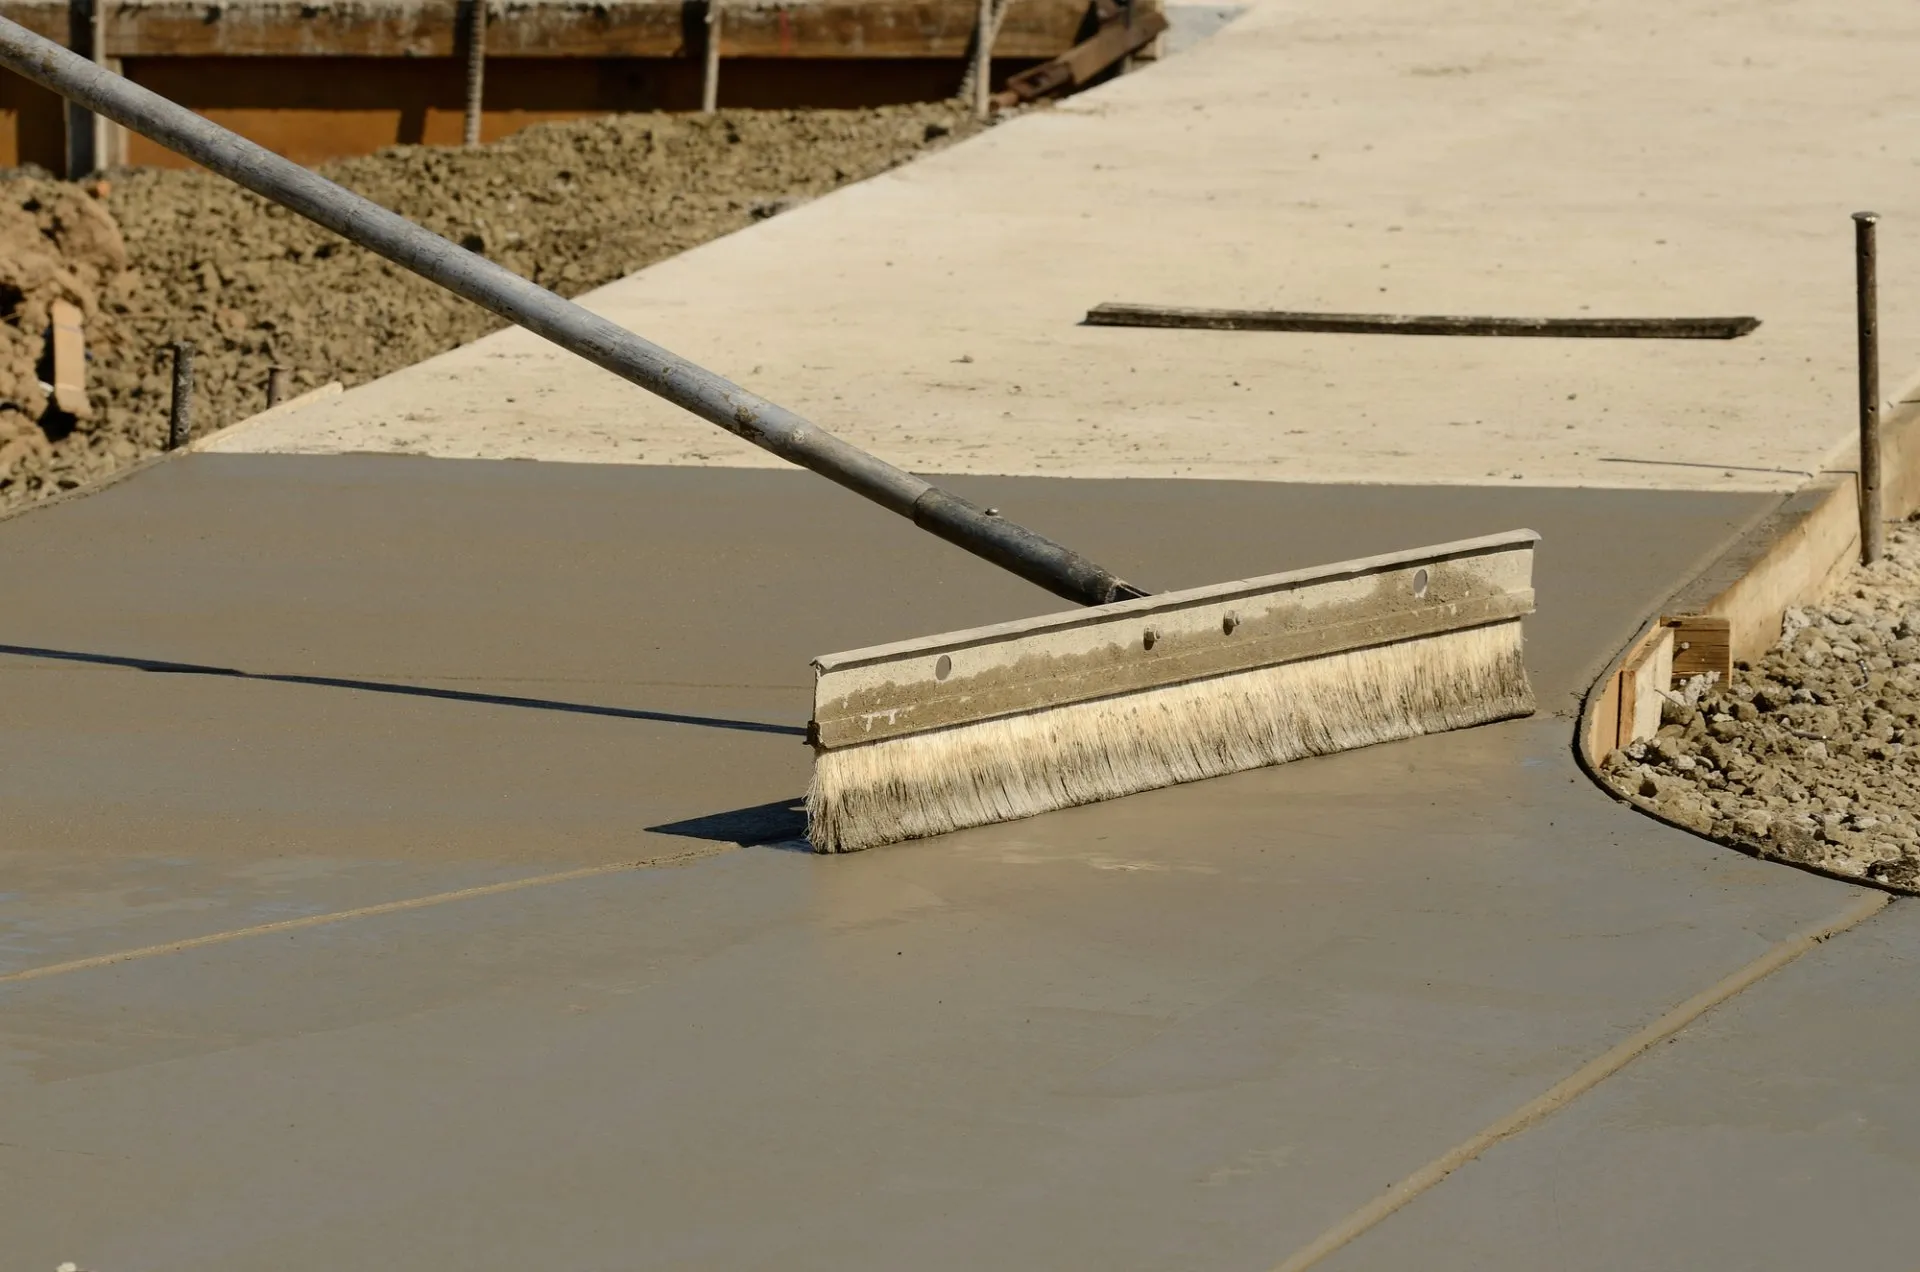 concrete contractor using a broom on freshly poured concrete for a broom finish